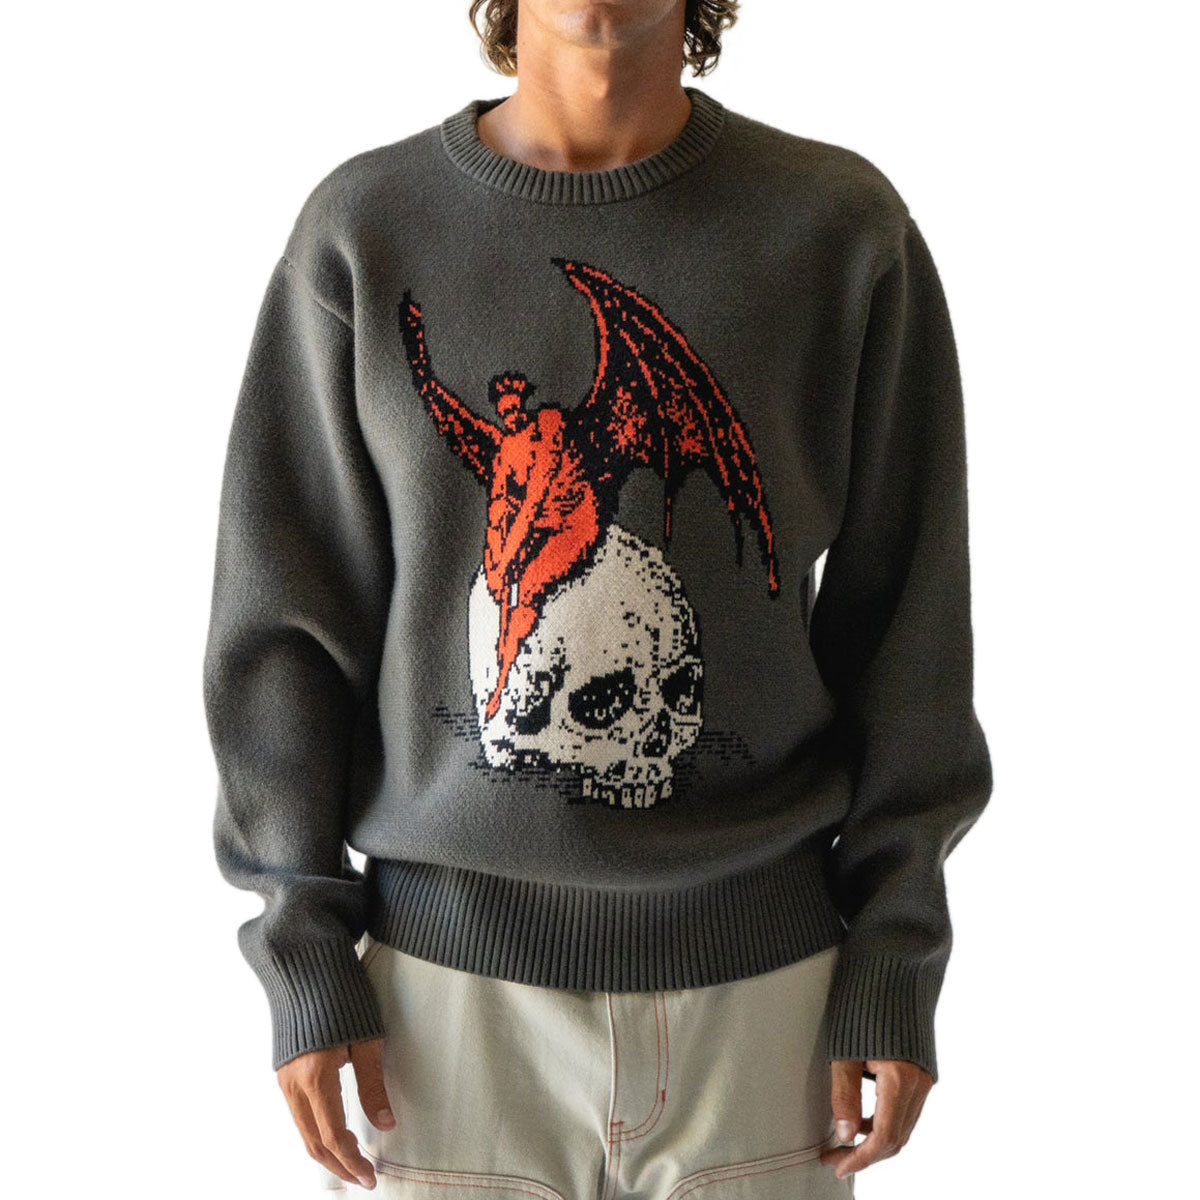 Welcome Nephilim Knit Sweater - Grey image 2